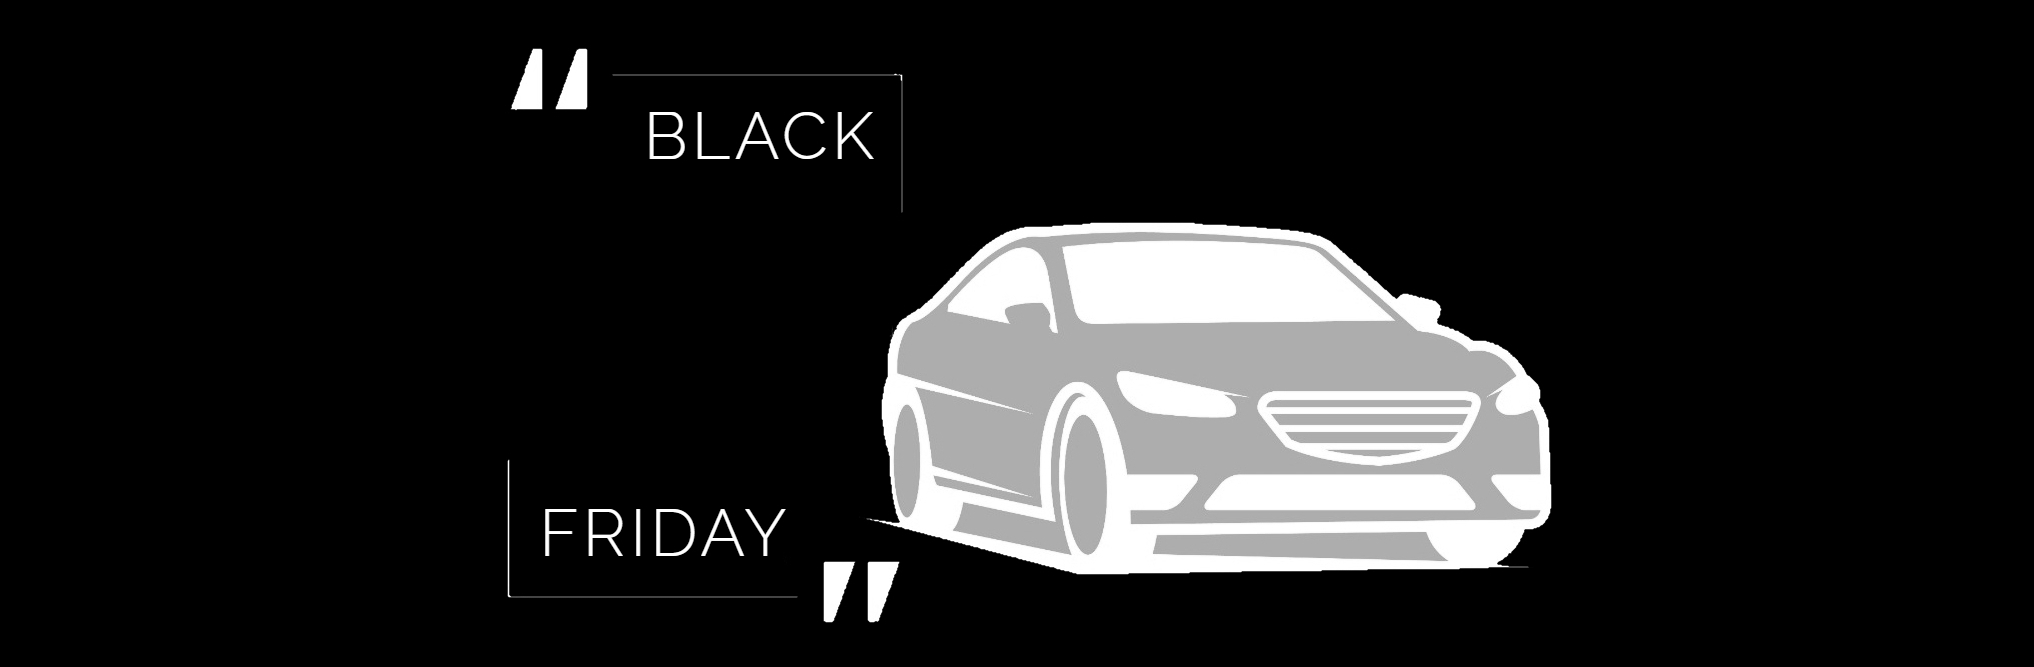 IS YOUR DEALERSHIP READY FOR BLACK FRIDAY?